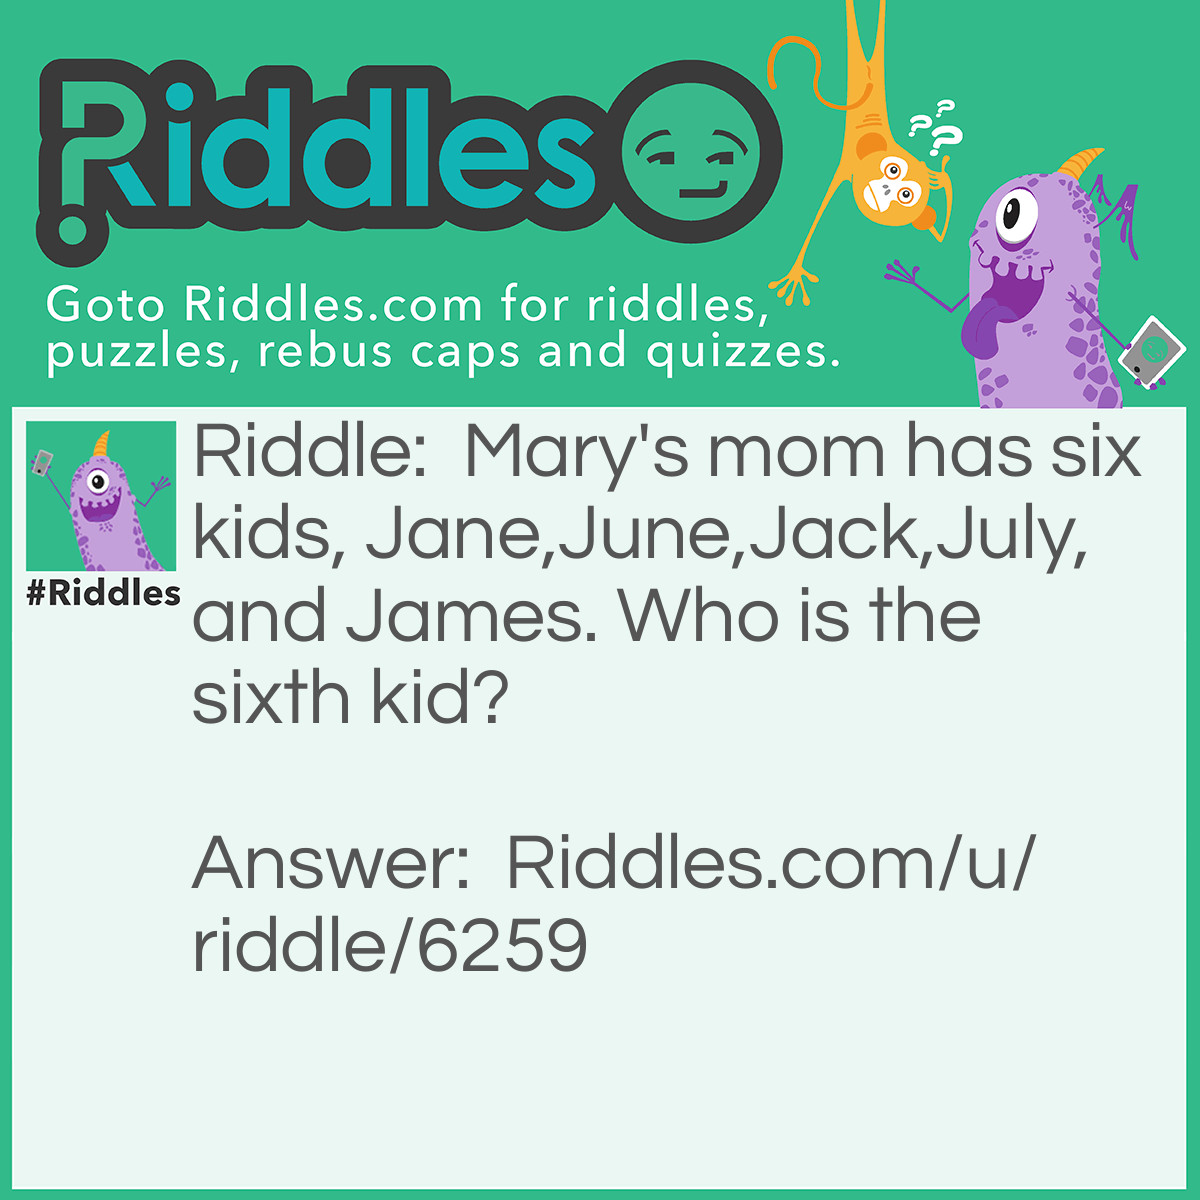 Riddle: Mary's mom has six kids, Jane,June,Jack,July,and James. Who is the sixth kid? Answer: Mary.